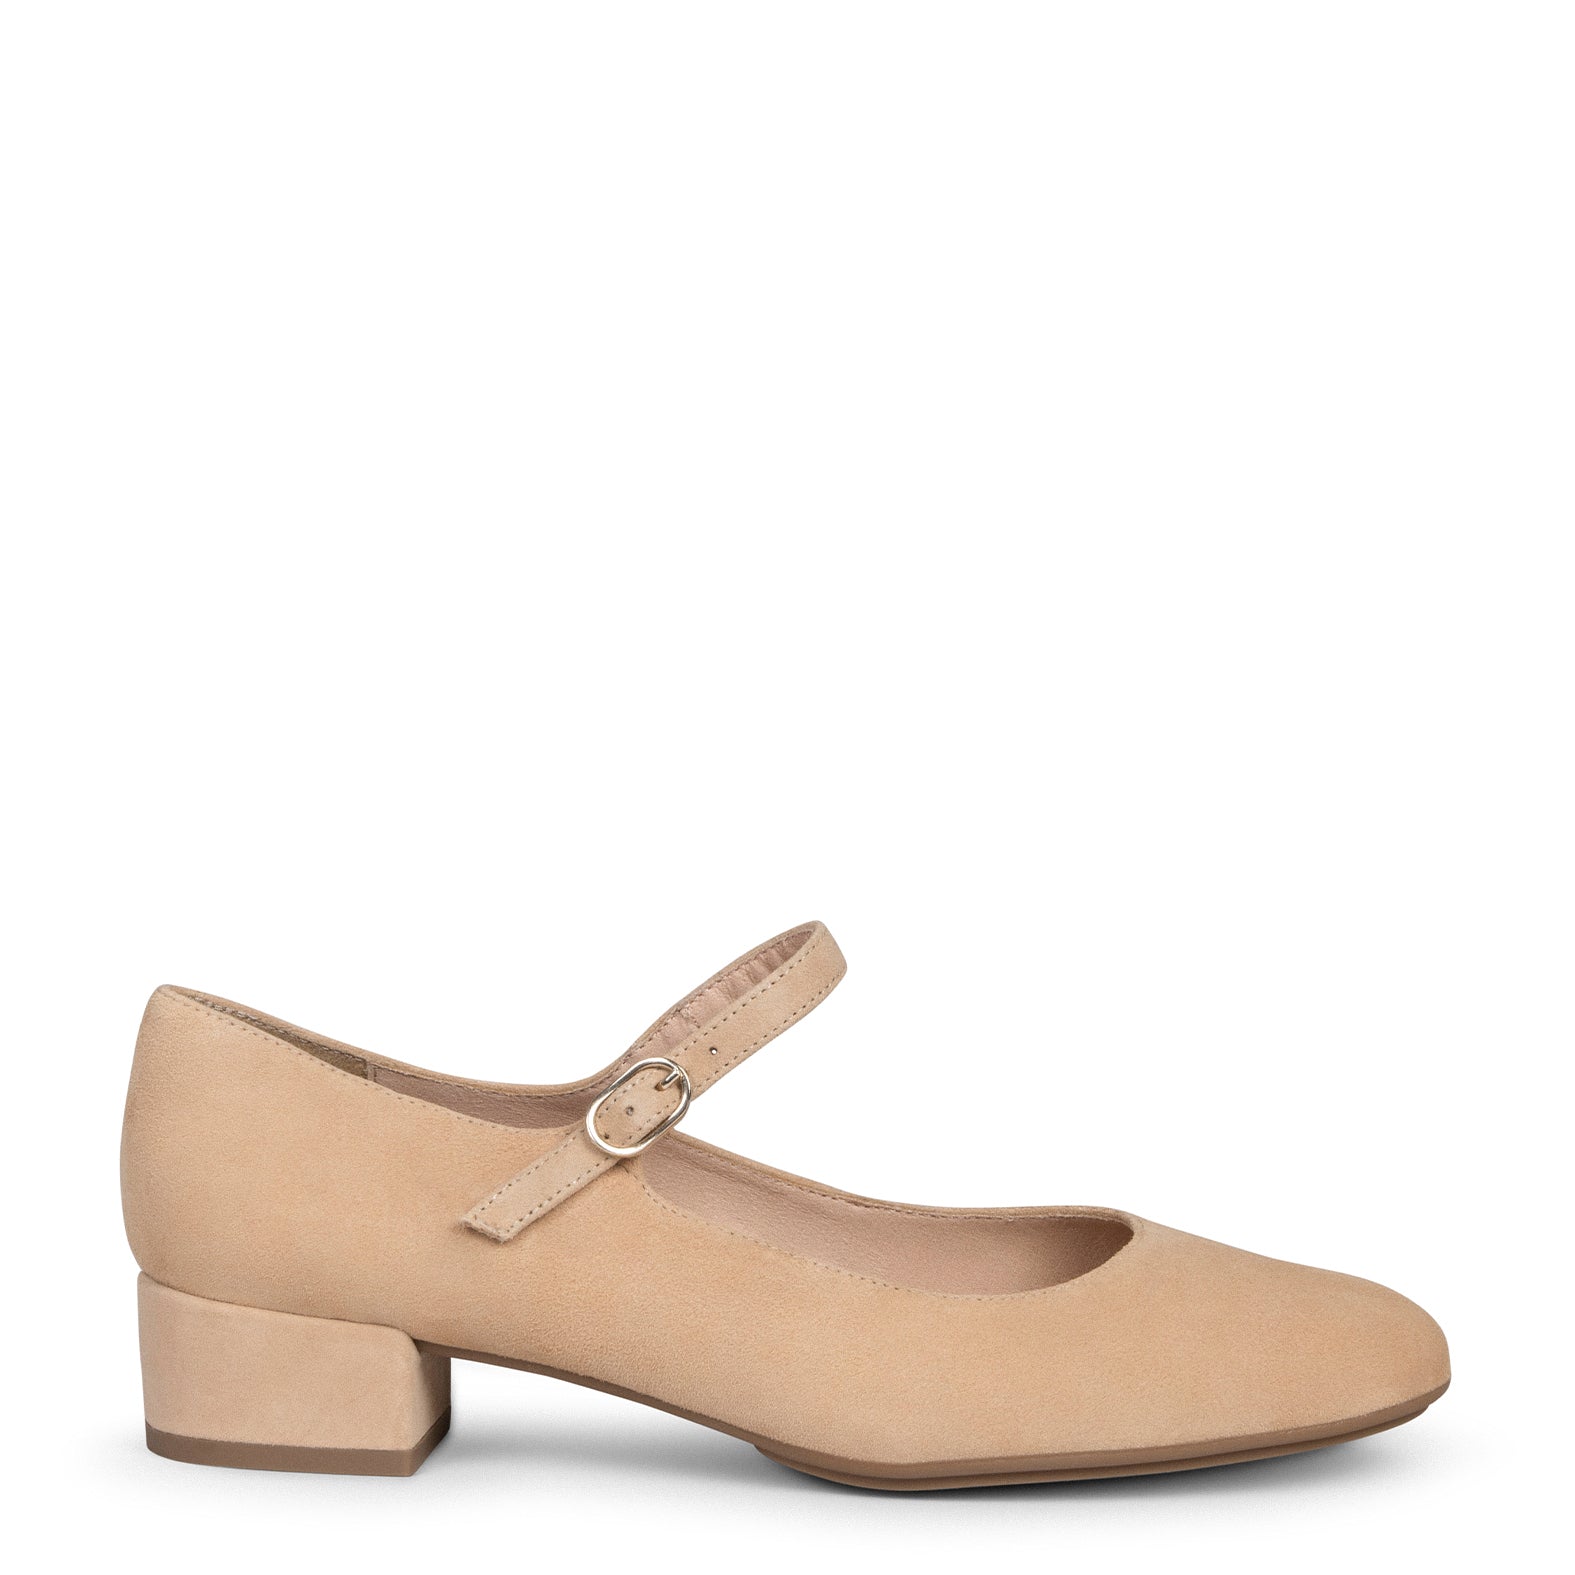 NORA – CAMEL Mary-Janes with low heel 